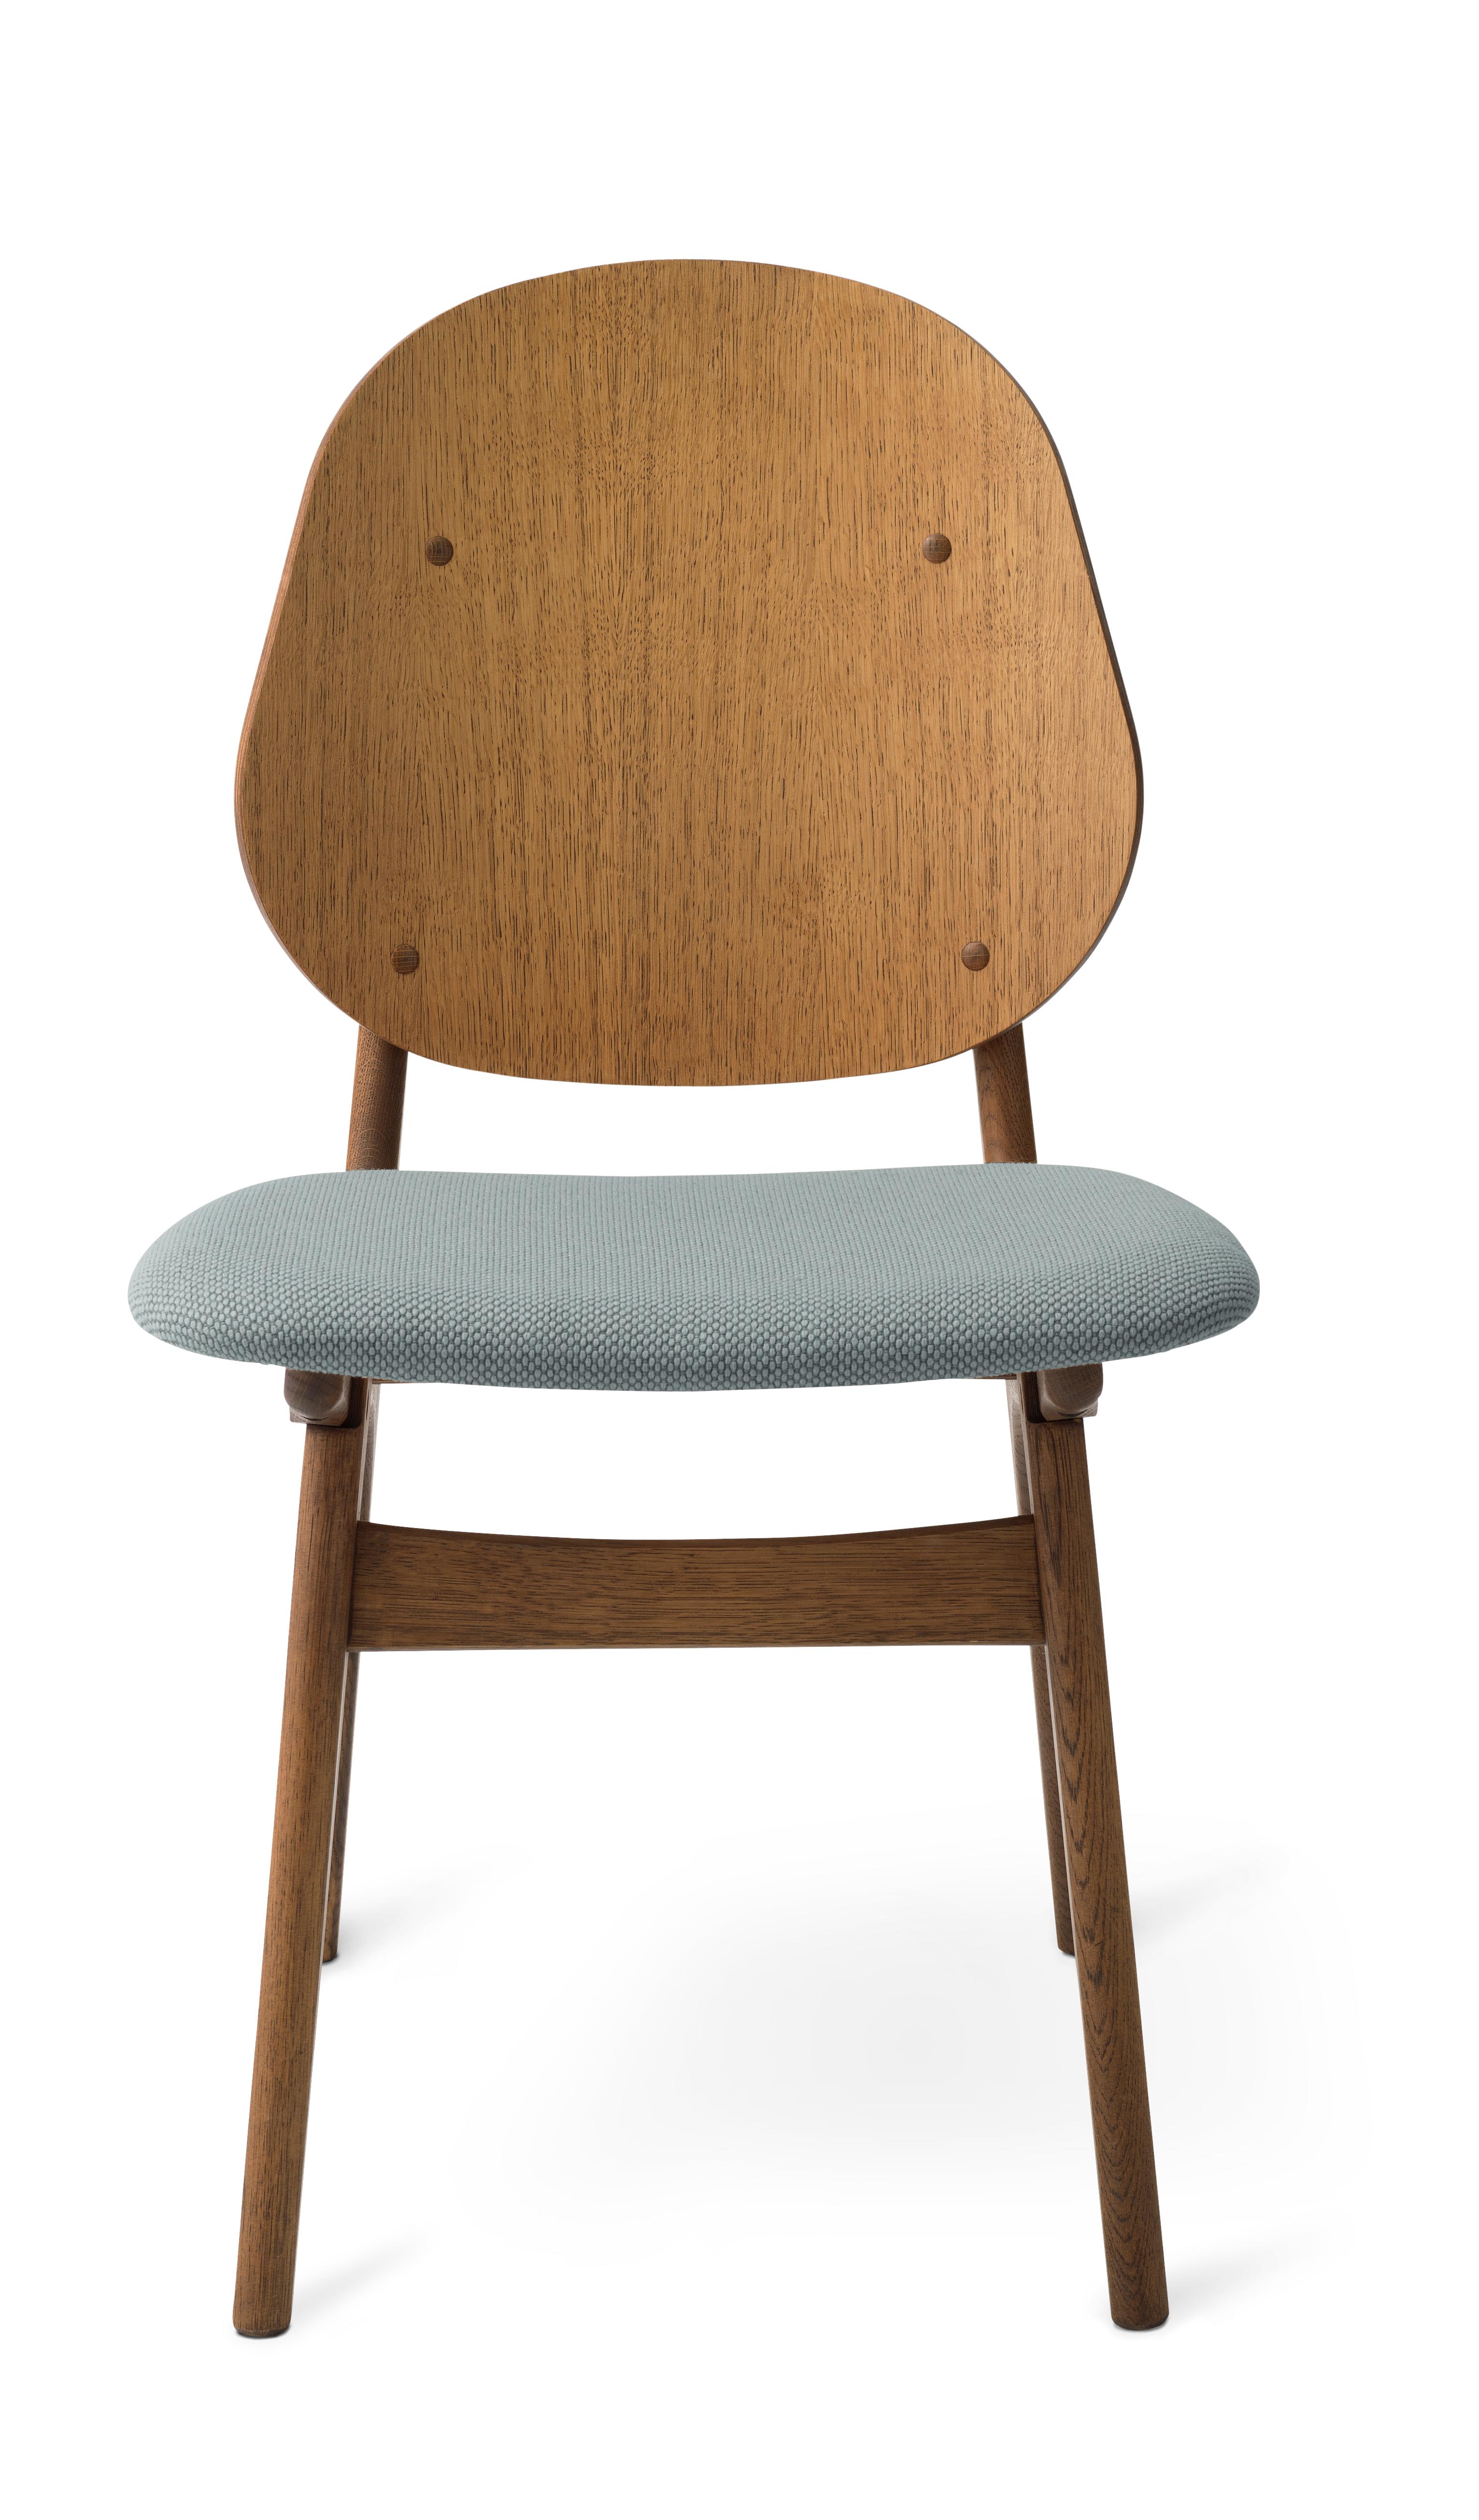 For Sale: Gray (Merit 016) Noble Chair in Teak Oak with Upholstery, by Arne Hovmand-Olsen from Warm Nordic